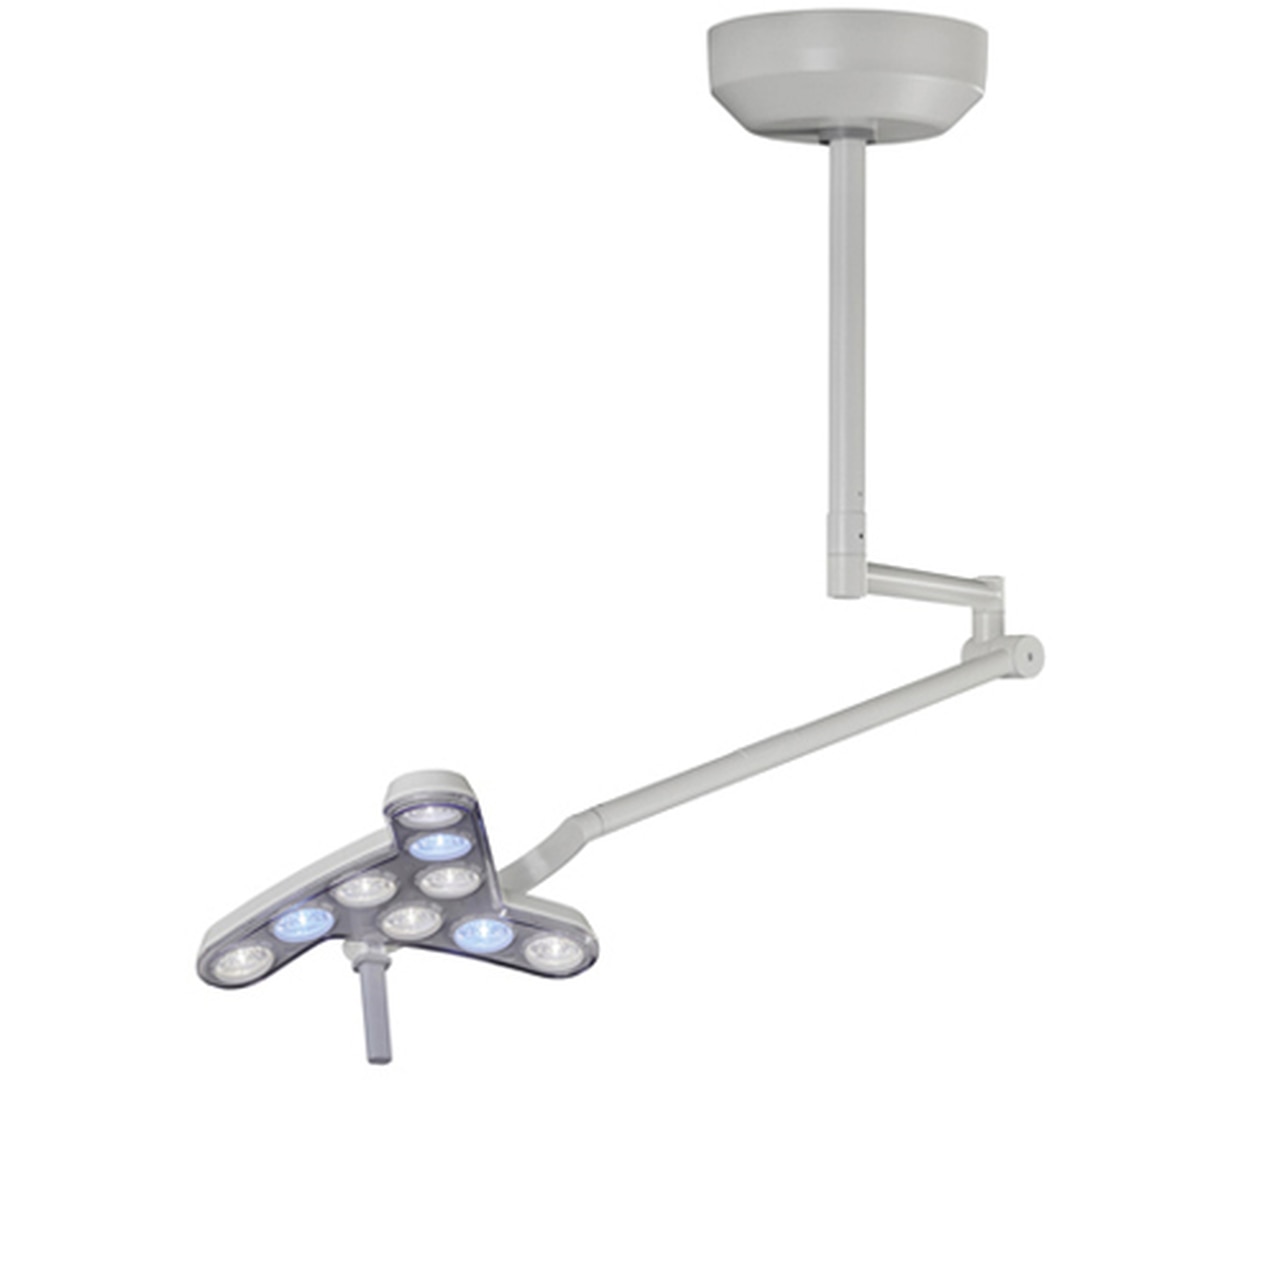 Waldmann D16076000, TRIANGO ENDO LED 100-1 C LED Procedure Light, Medical Grade, Ceiling Mounted, with Dimming, with Endo Mode